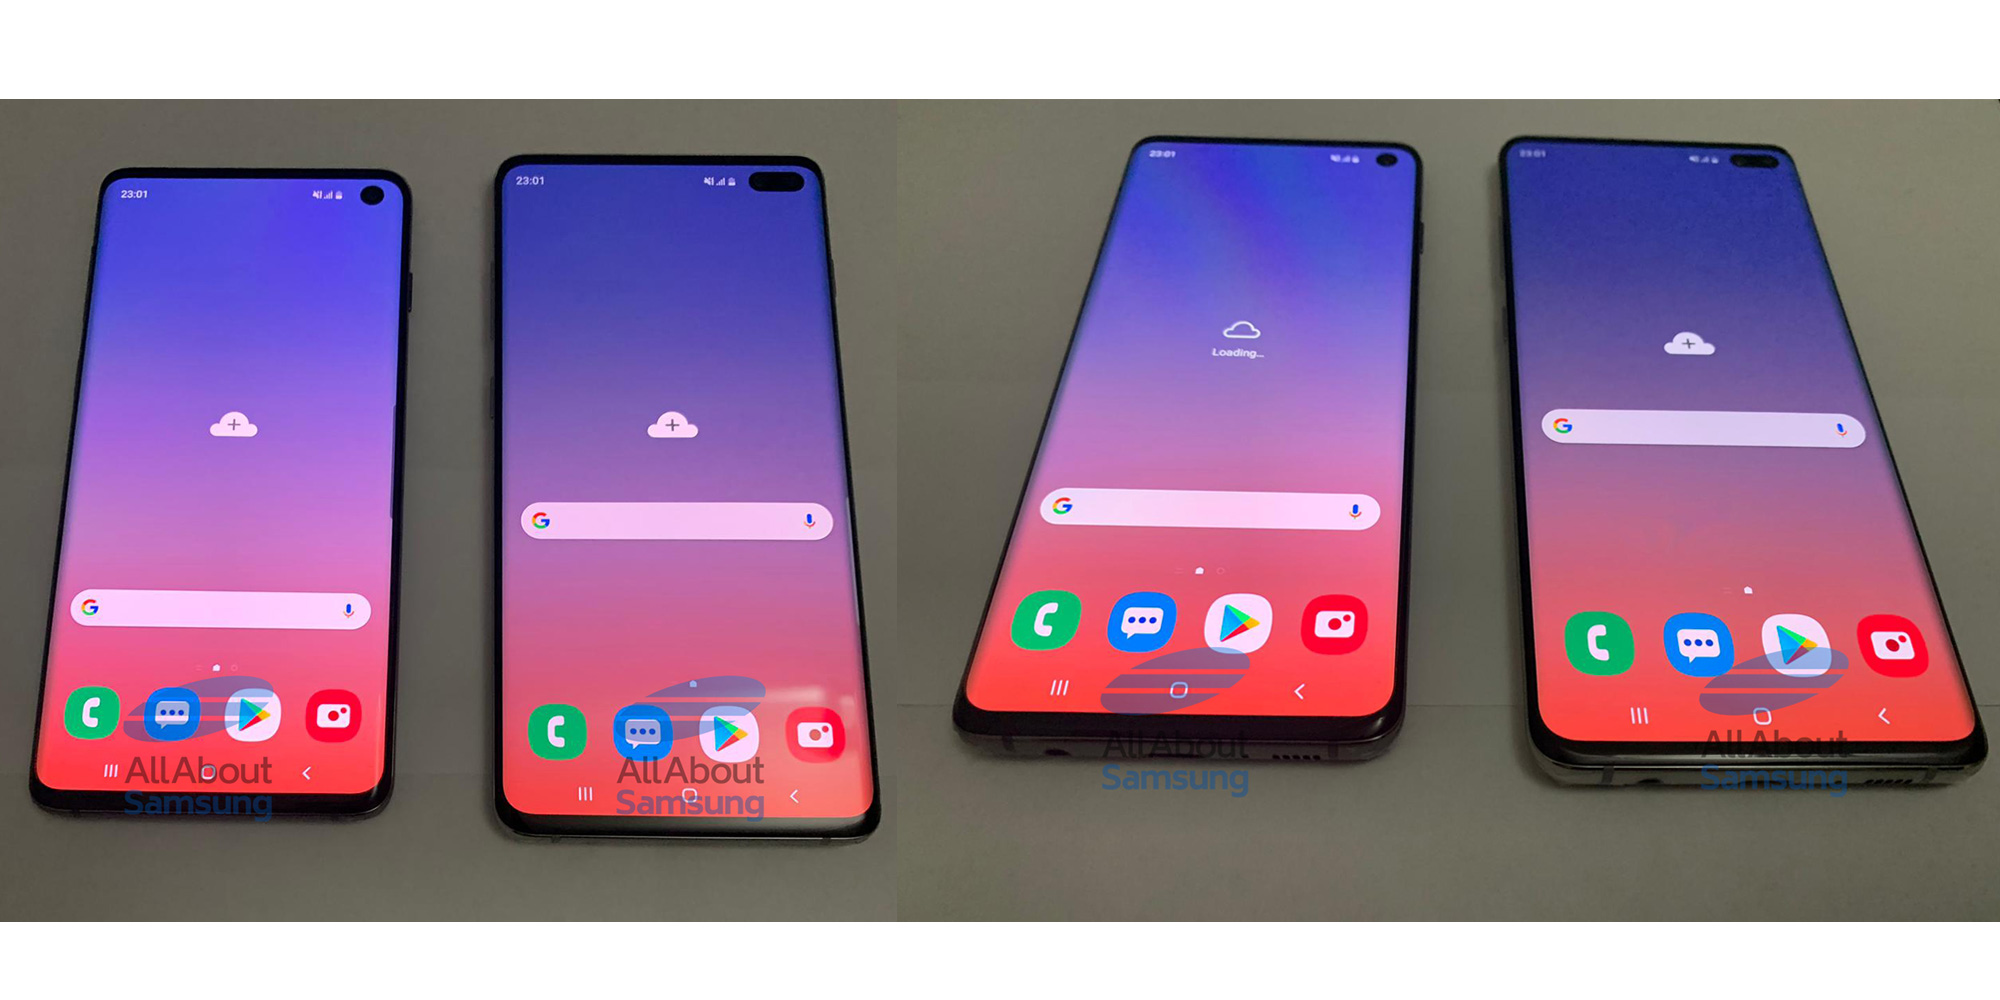 Samsung Galaxy S10 and S10+ leak in full, here's a closer look! - PhoneArena